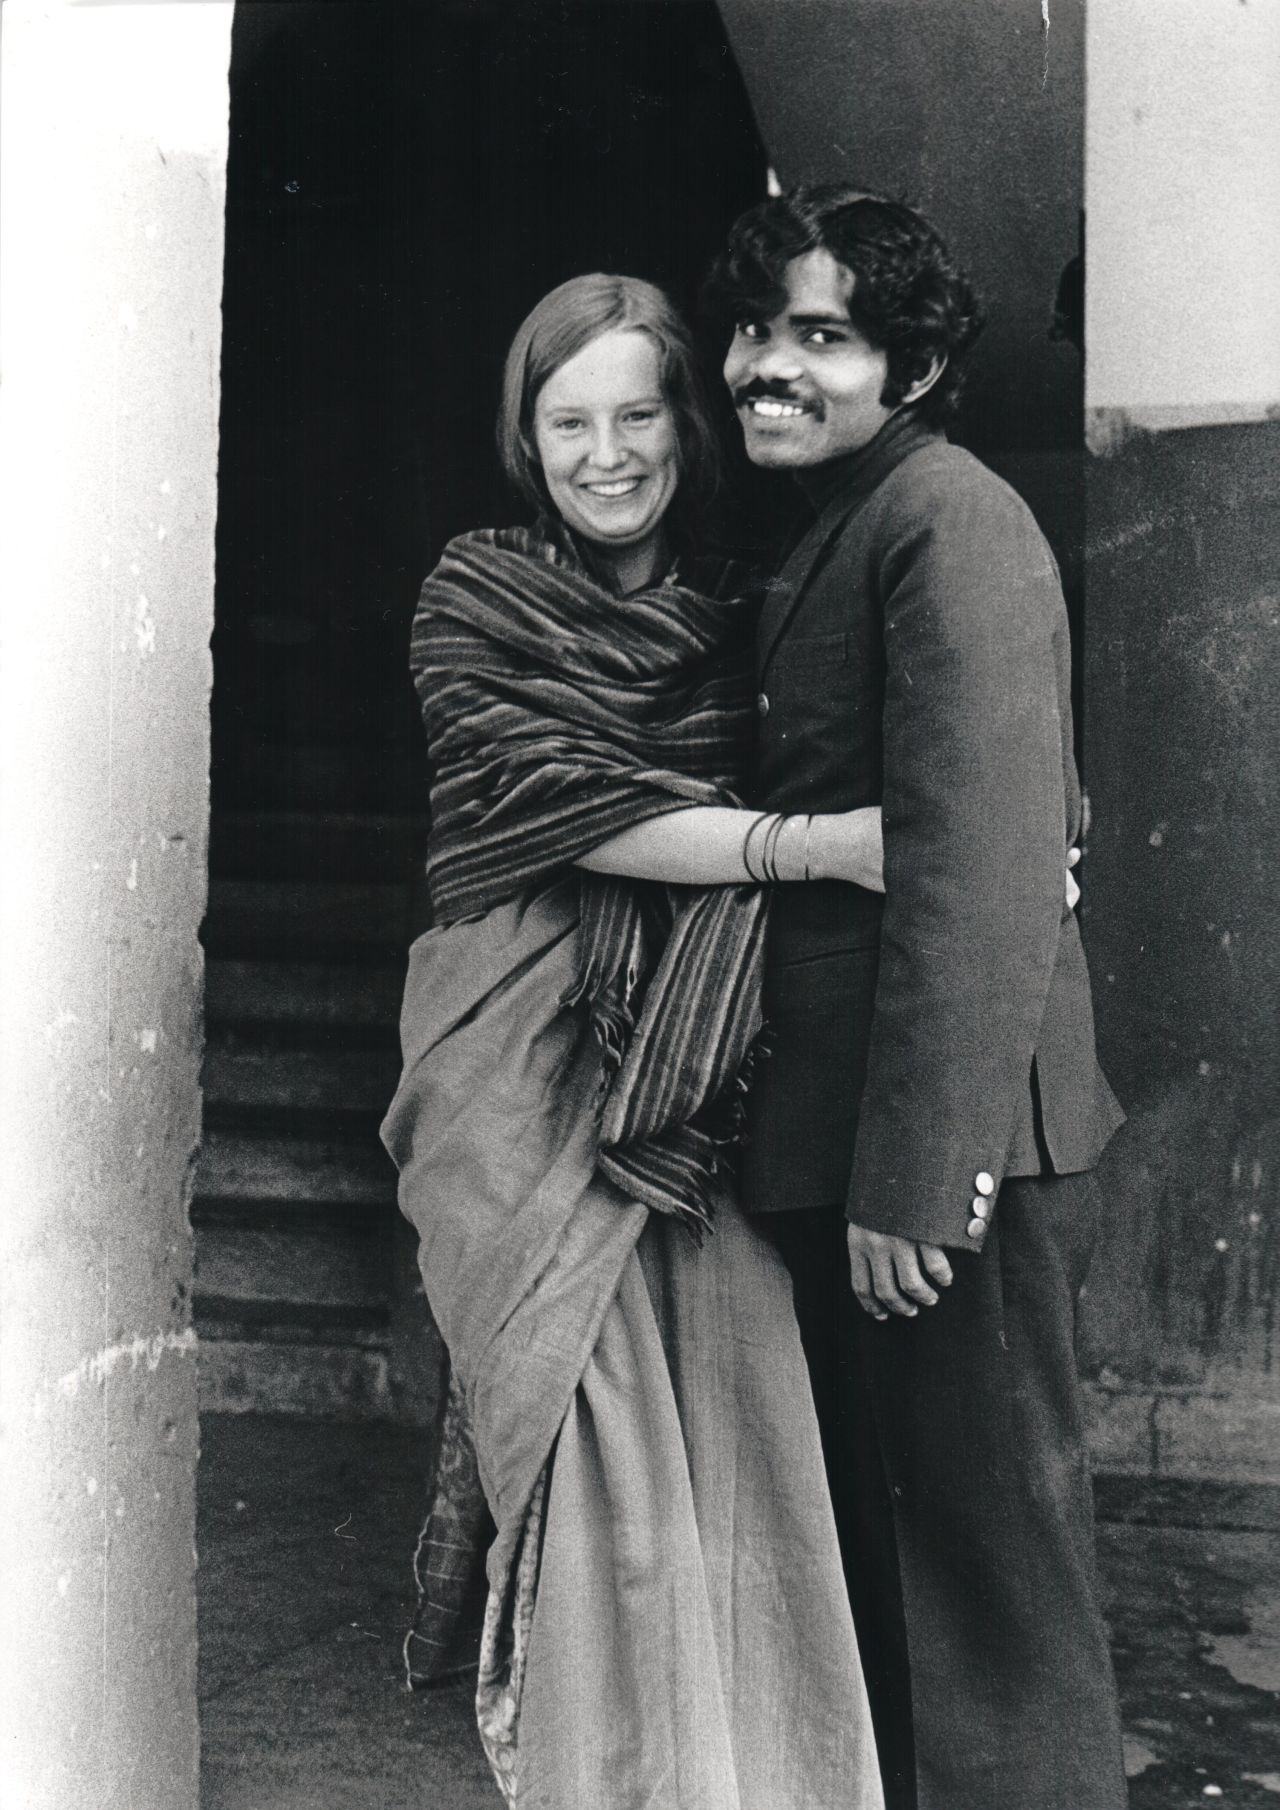 Swedish traveler Charlotte Von Schedvin and Indian art student PK Mahanandia fell in love in India in late 1975. She was a descendant of Swedish nobility; he a member of India's "untouchable" Dalit caste. 